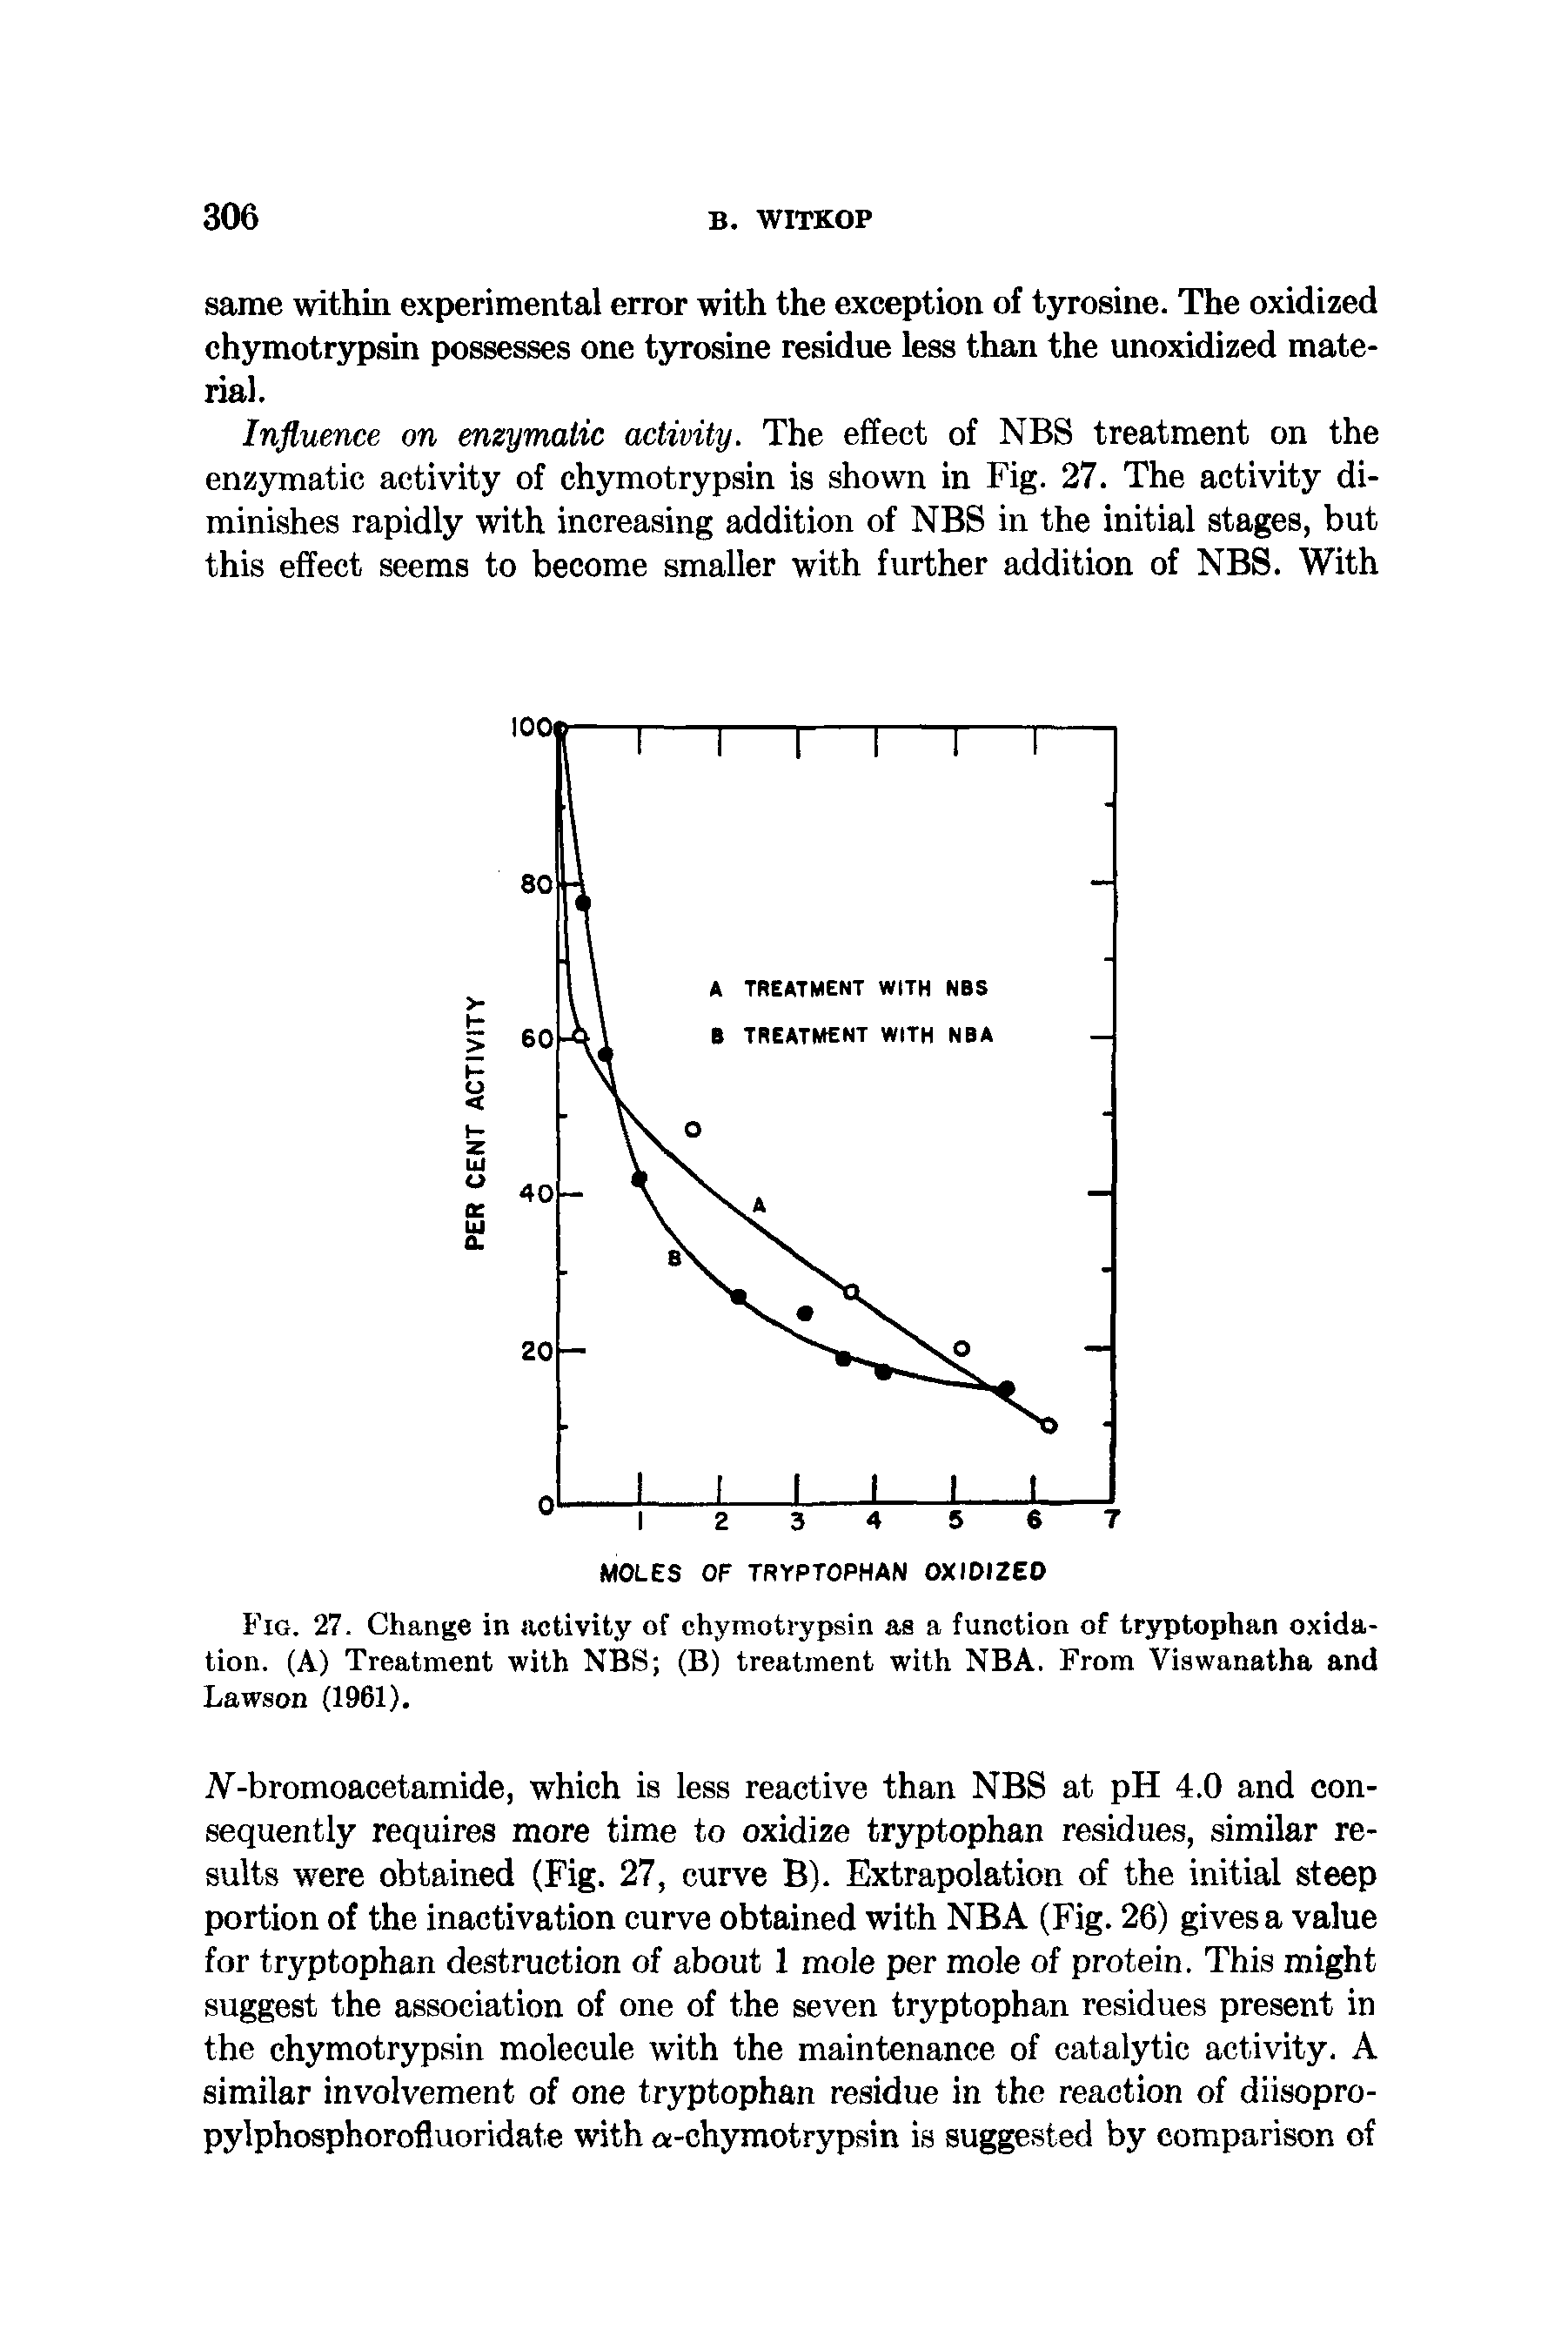 Fig. 27. Change in activity of chymotrypsin as a function of tryptophan oxidation. (A) Treatment with NBS (B) treatment with NBA. From Viswanatha and Lawson (1961).